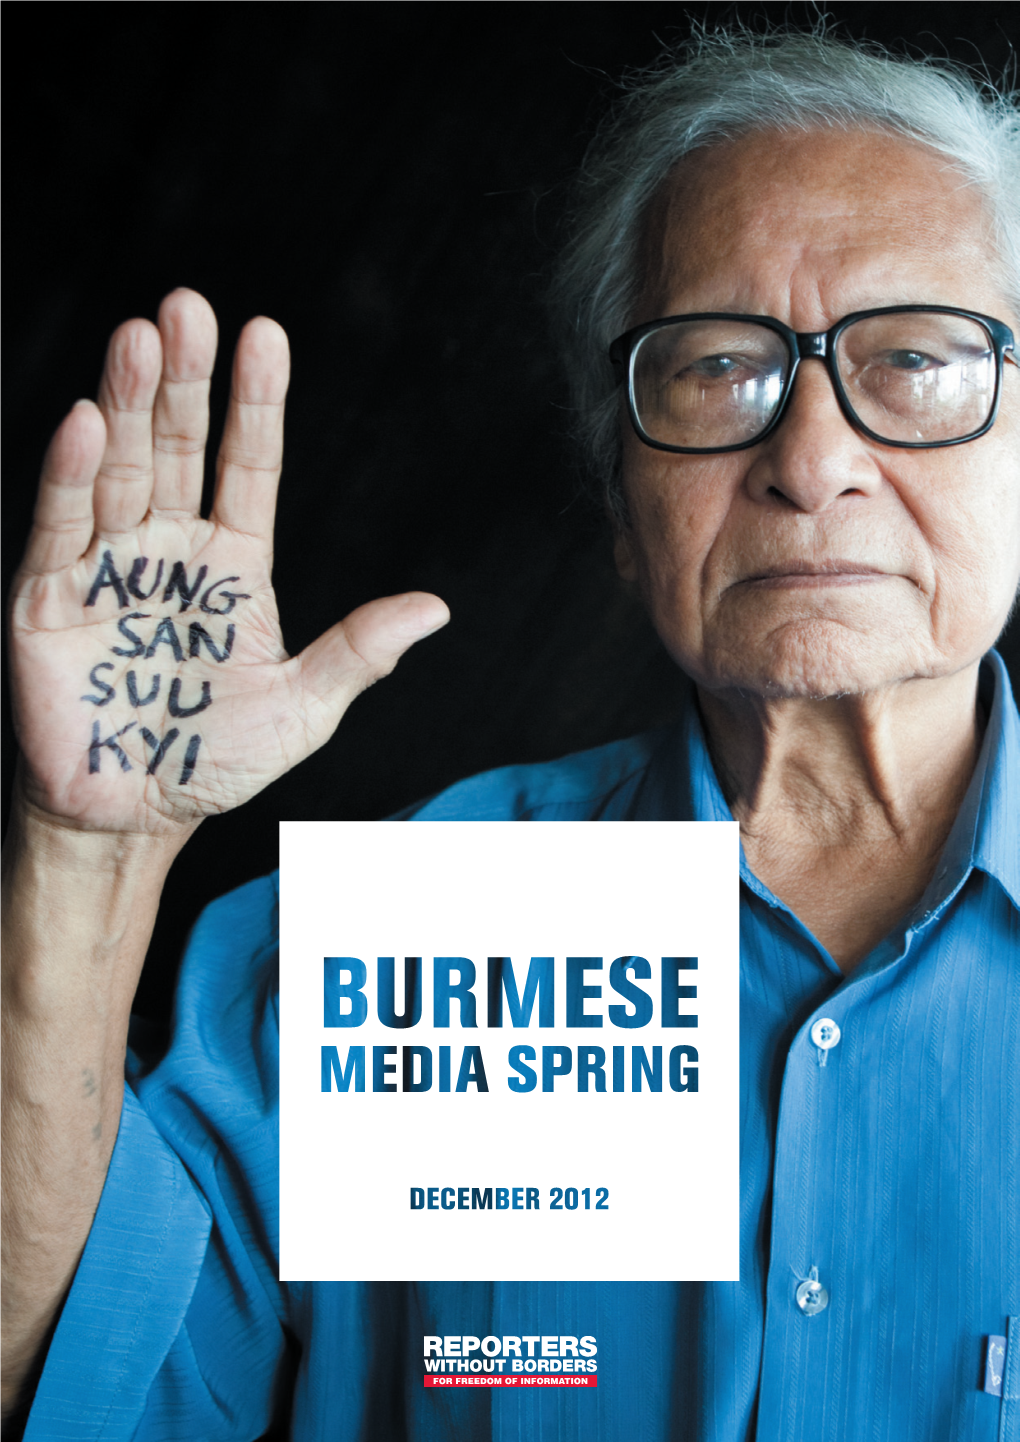 Burmese Journalists Are Now Able to Meet and Talk in Public with Representatives of International Organizations and Media Without Fearing for Their Safety